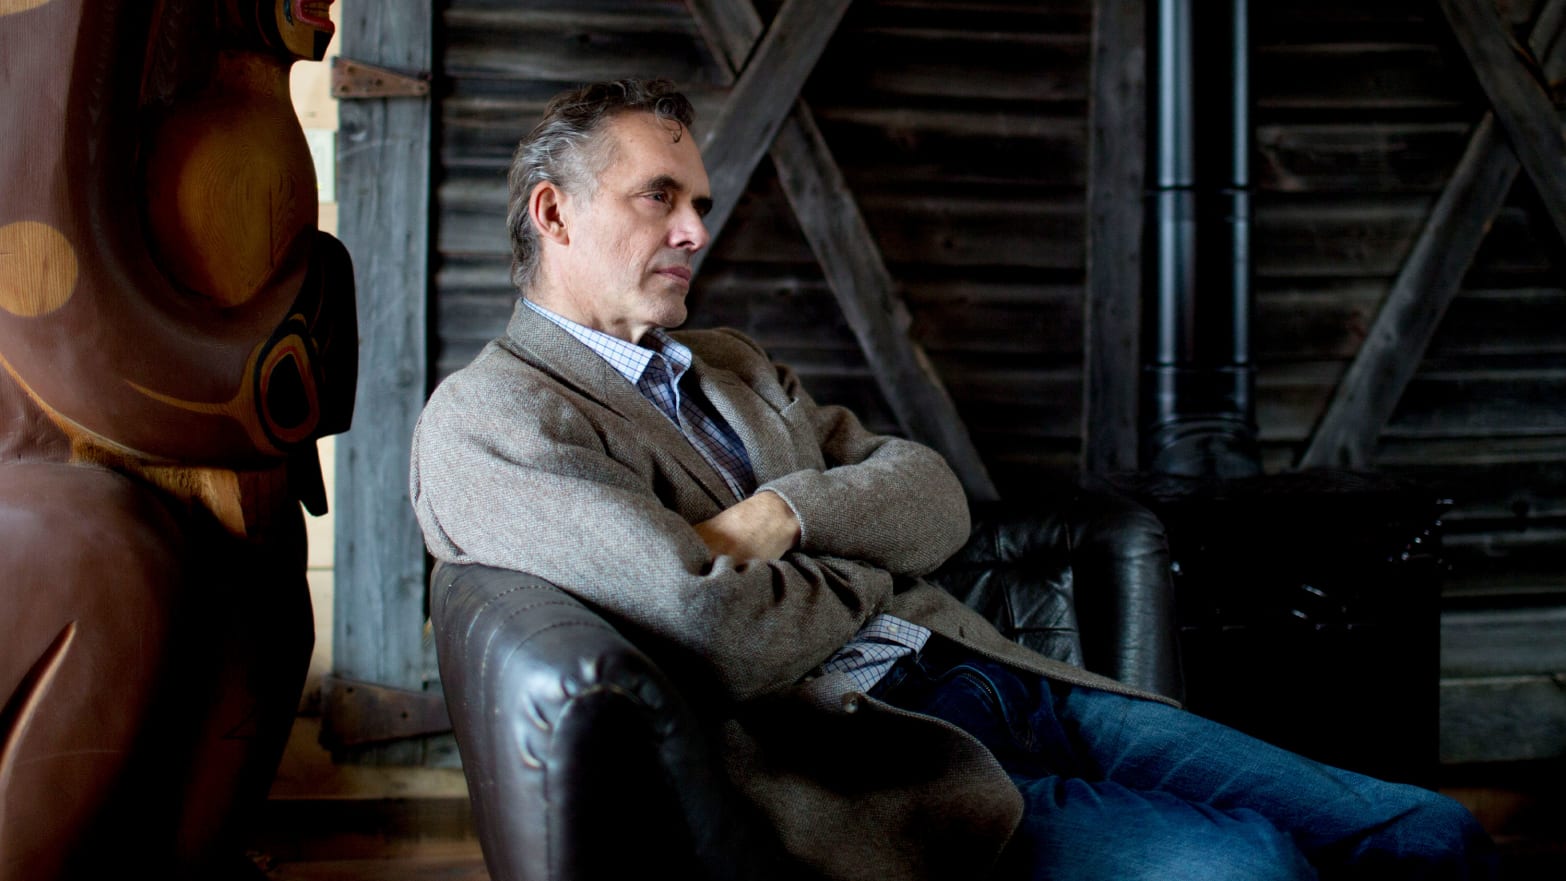 Jordan Peterson sits in a chair with his arms crossed